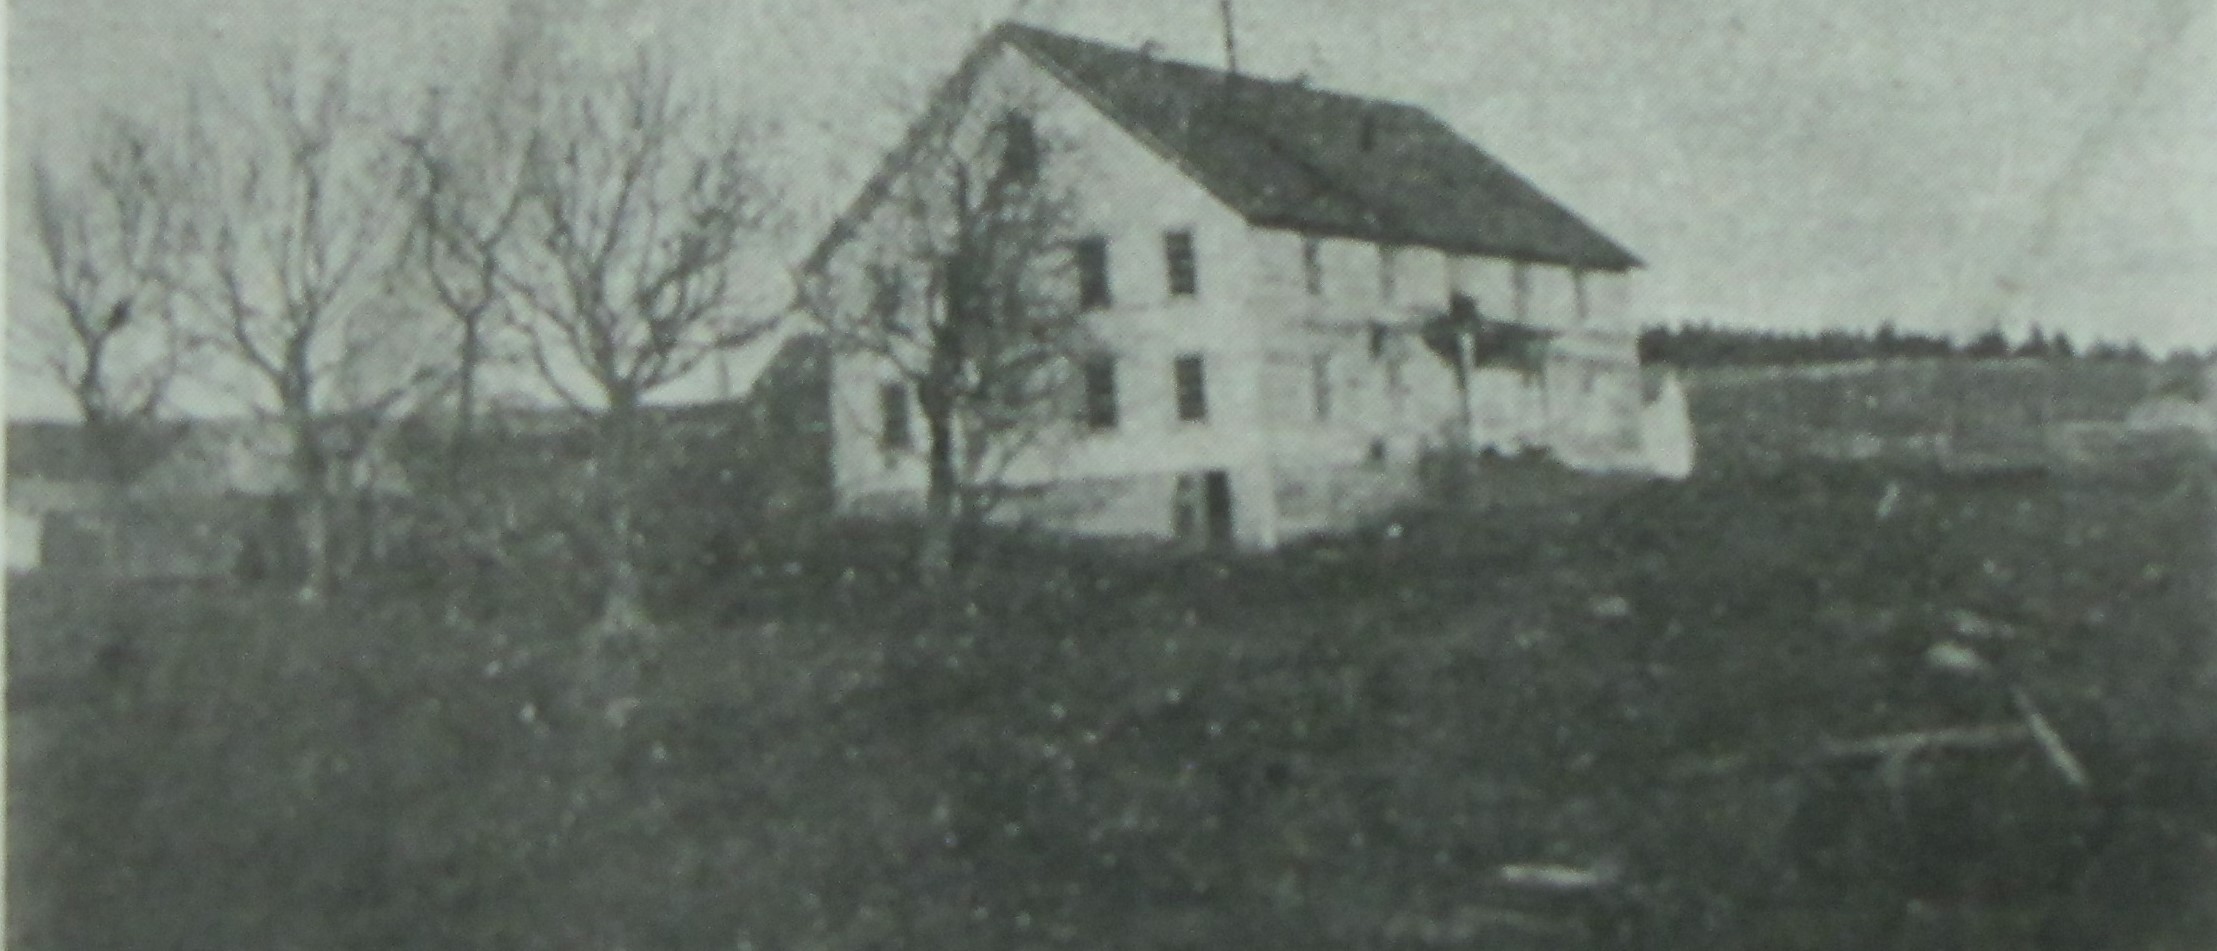 The Building of St. Herman Orphanage in Kodiak, AK (end of 19th, beginning of 20th century)